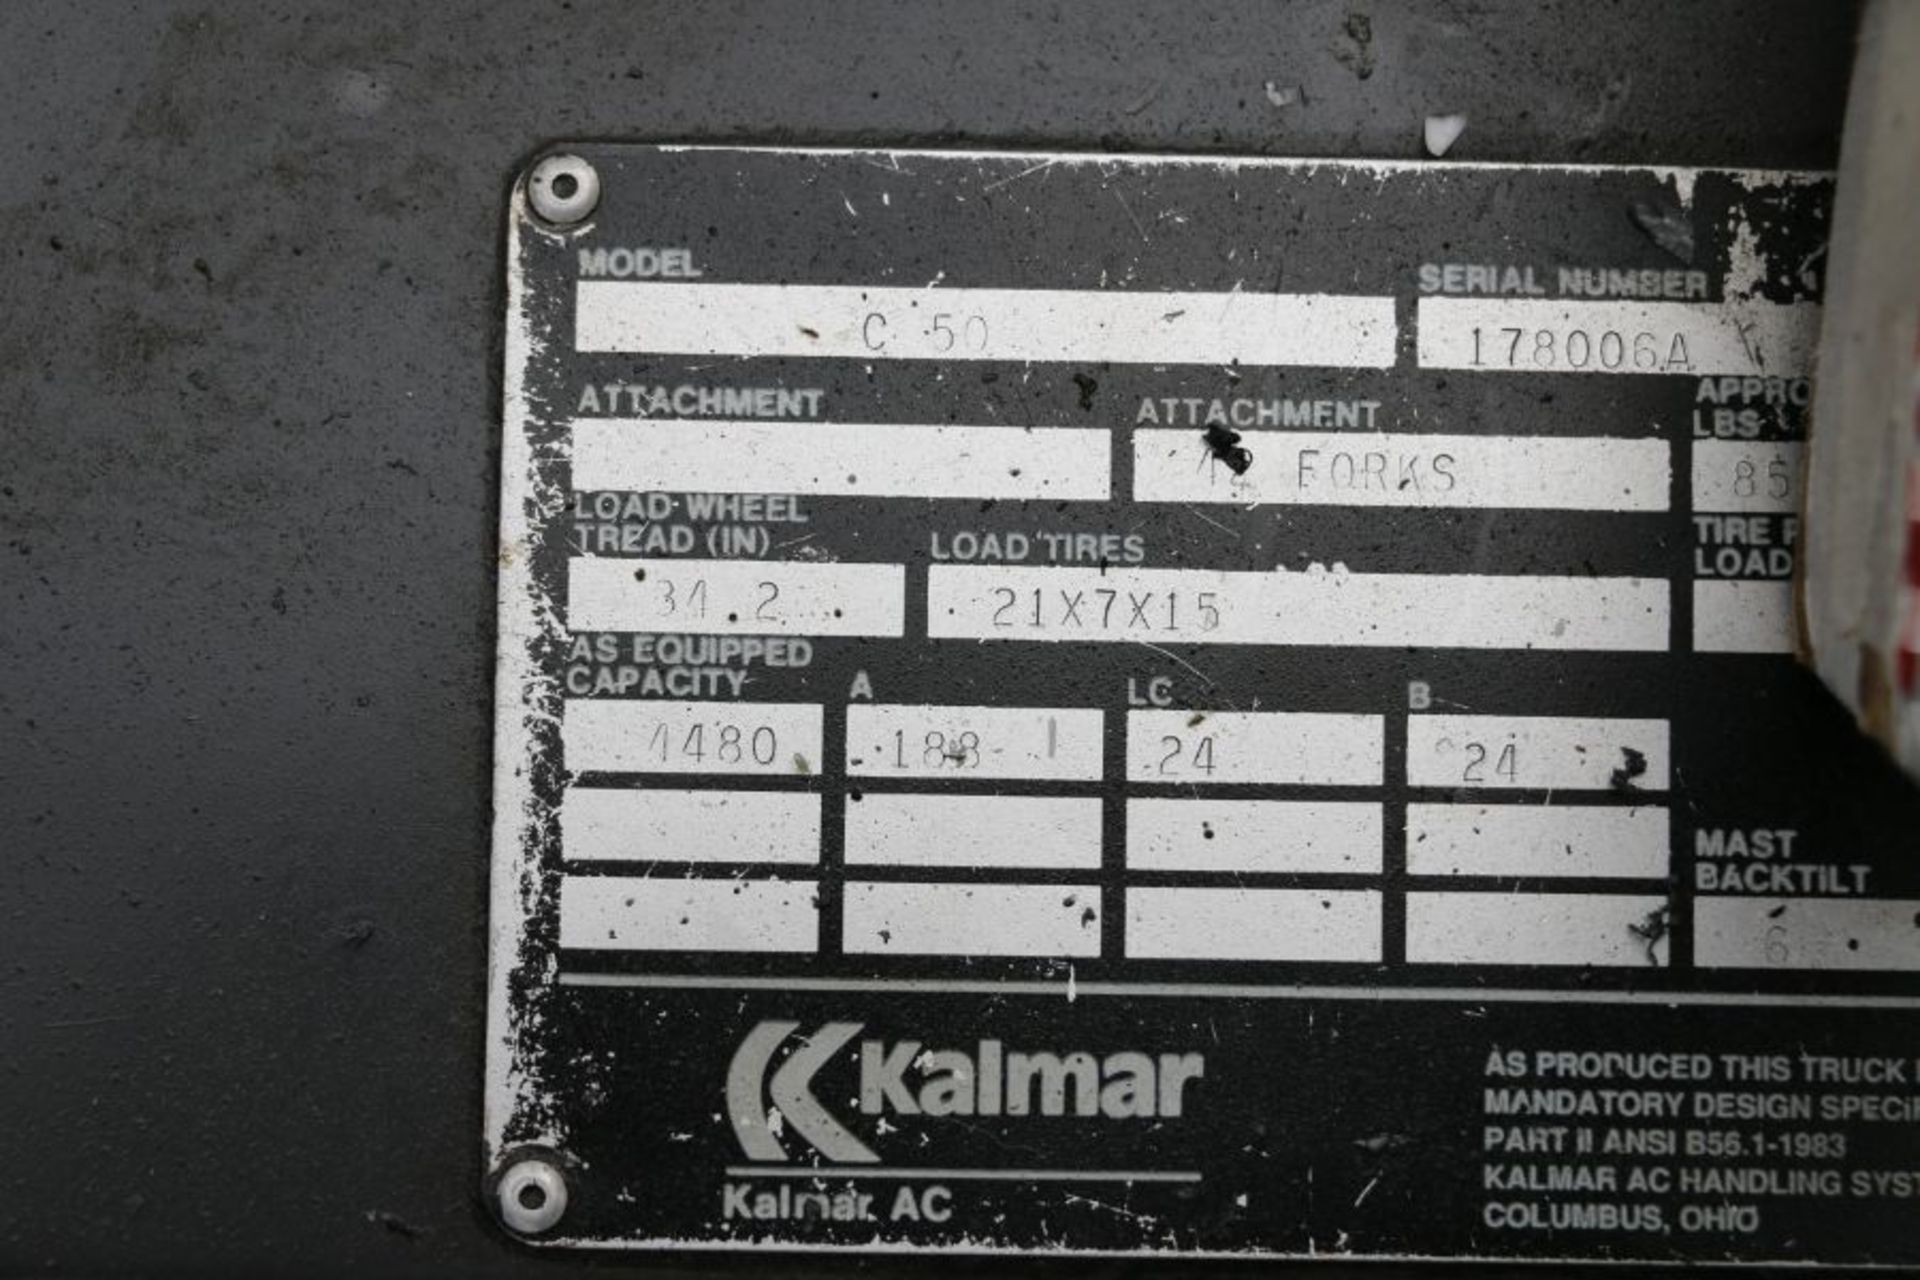 Kalmar C-50 Fork Lift, LPG, 4500 Lbs Cap., 6823 Hrs, s/n 178006A *Late Delivery* - Image 6 of 6